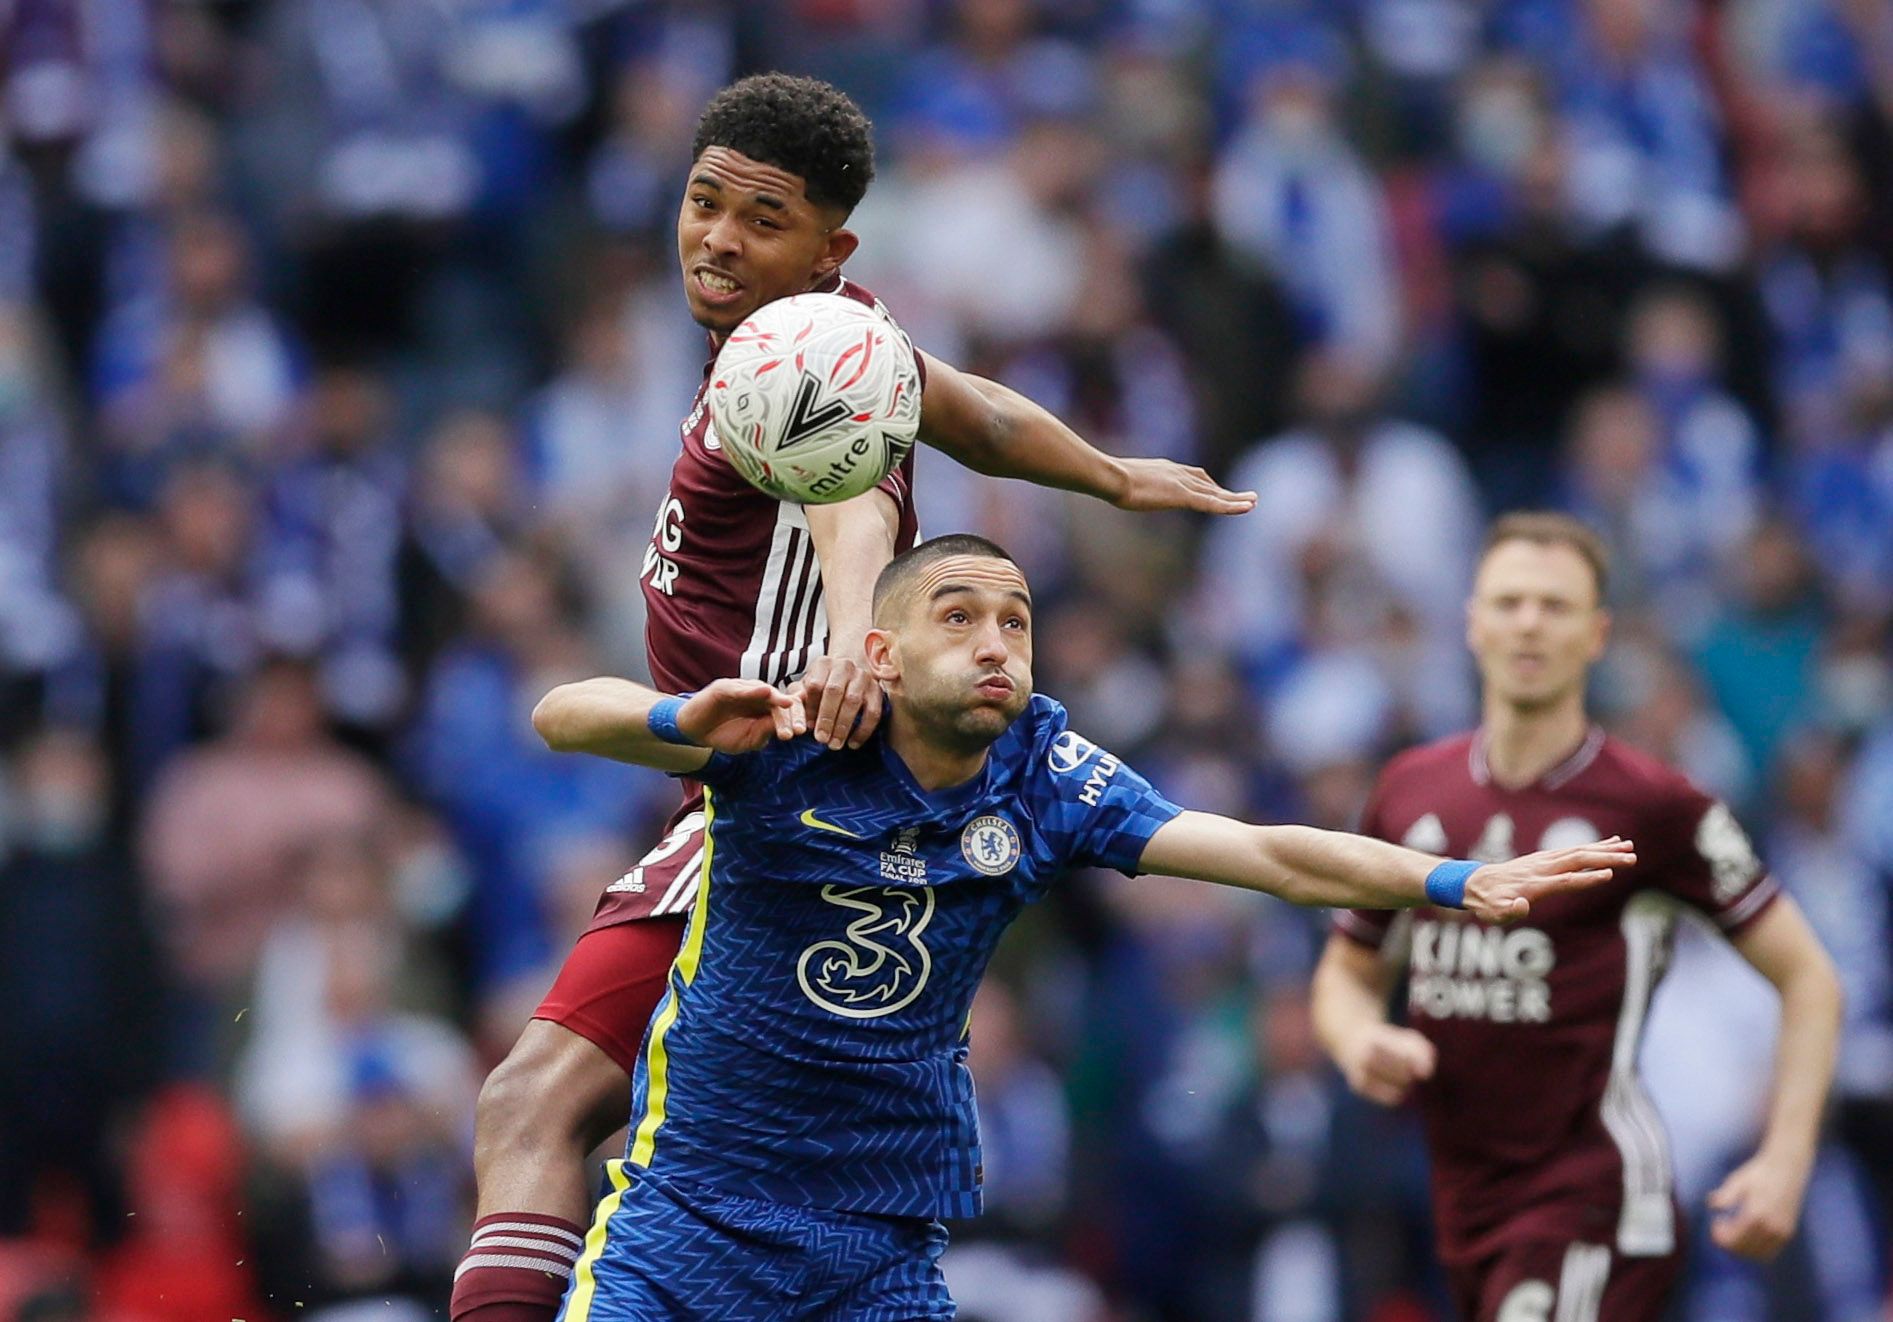 Soccer Football - FA Cup Final - Chelsea v Leicester City - Wembley Stadium, London, Britain - May 15, 2021 Leicester City's Wesley Fofana in action with Chelsea's Hakim Ziyech Pool via REUTERS/Kirsty Wigglesworth